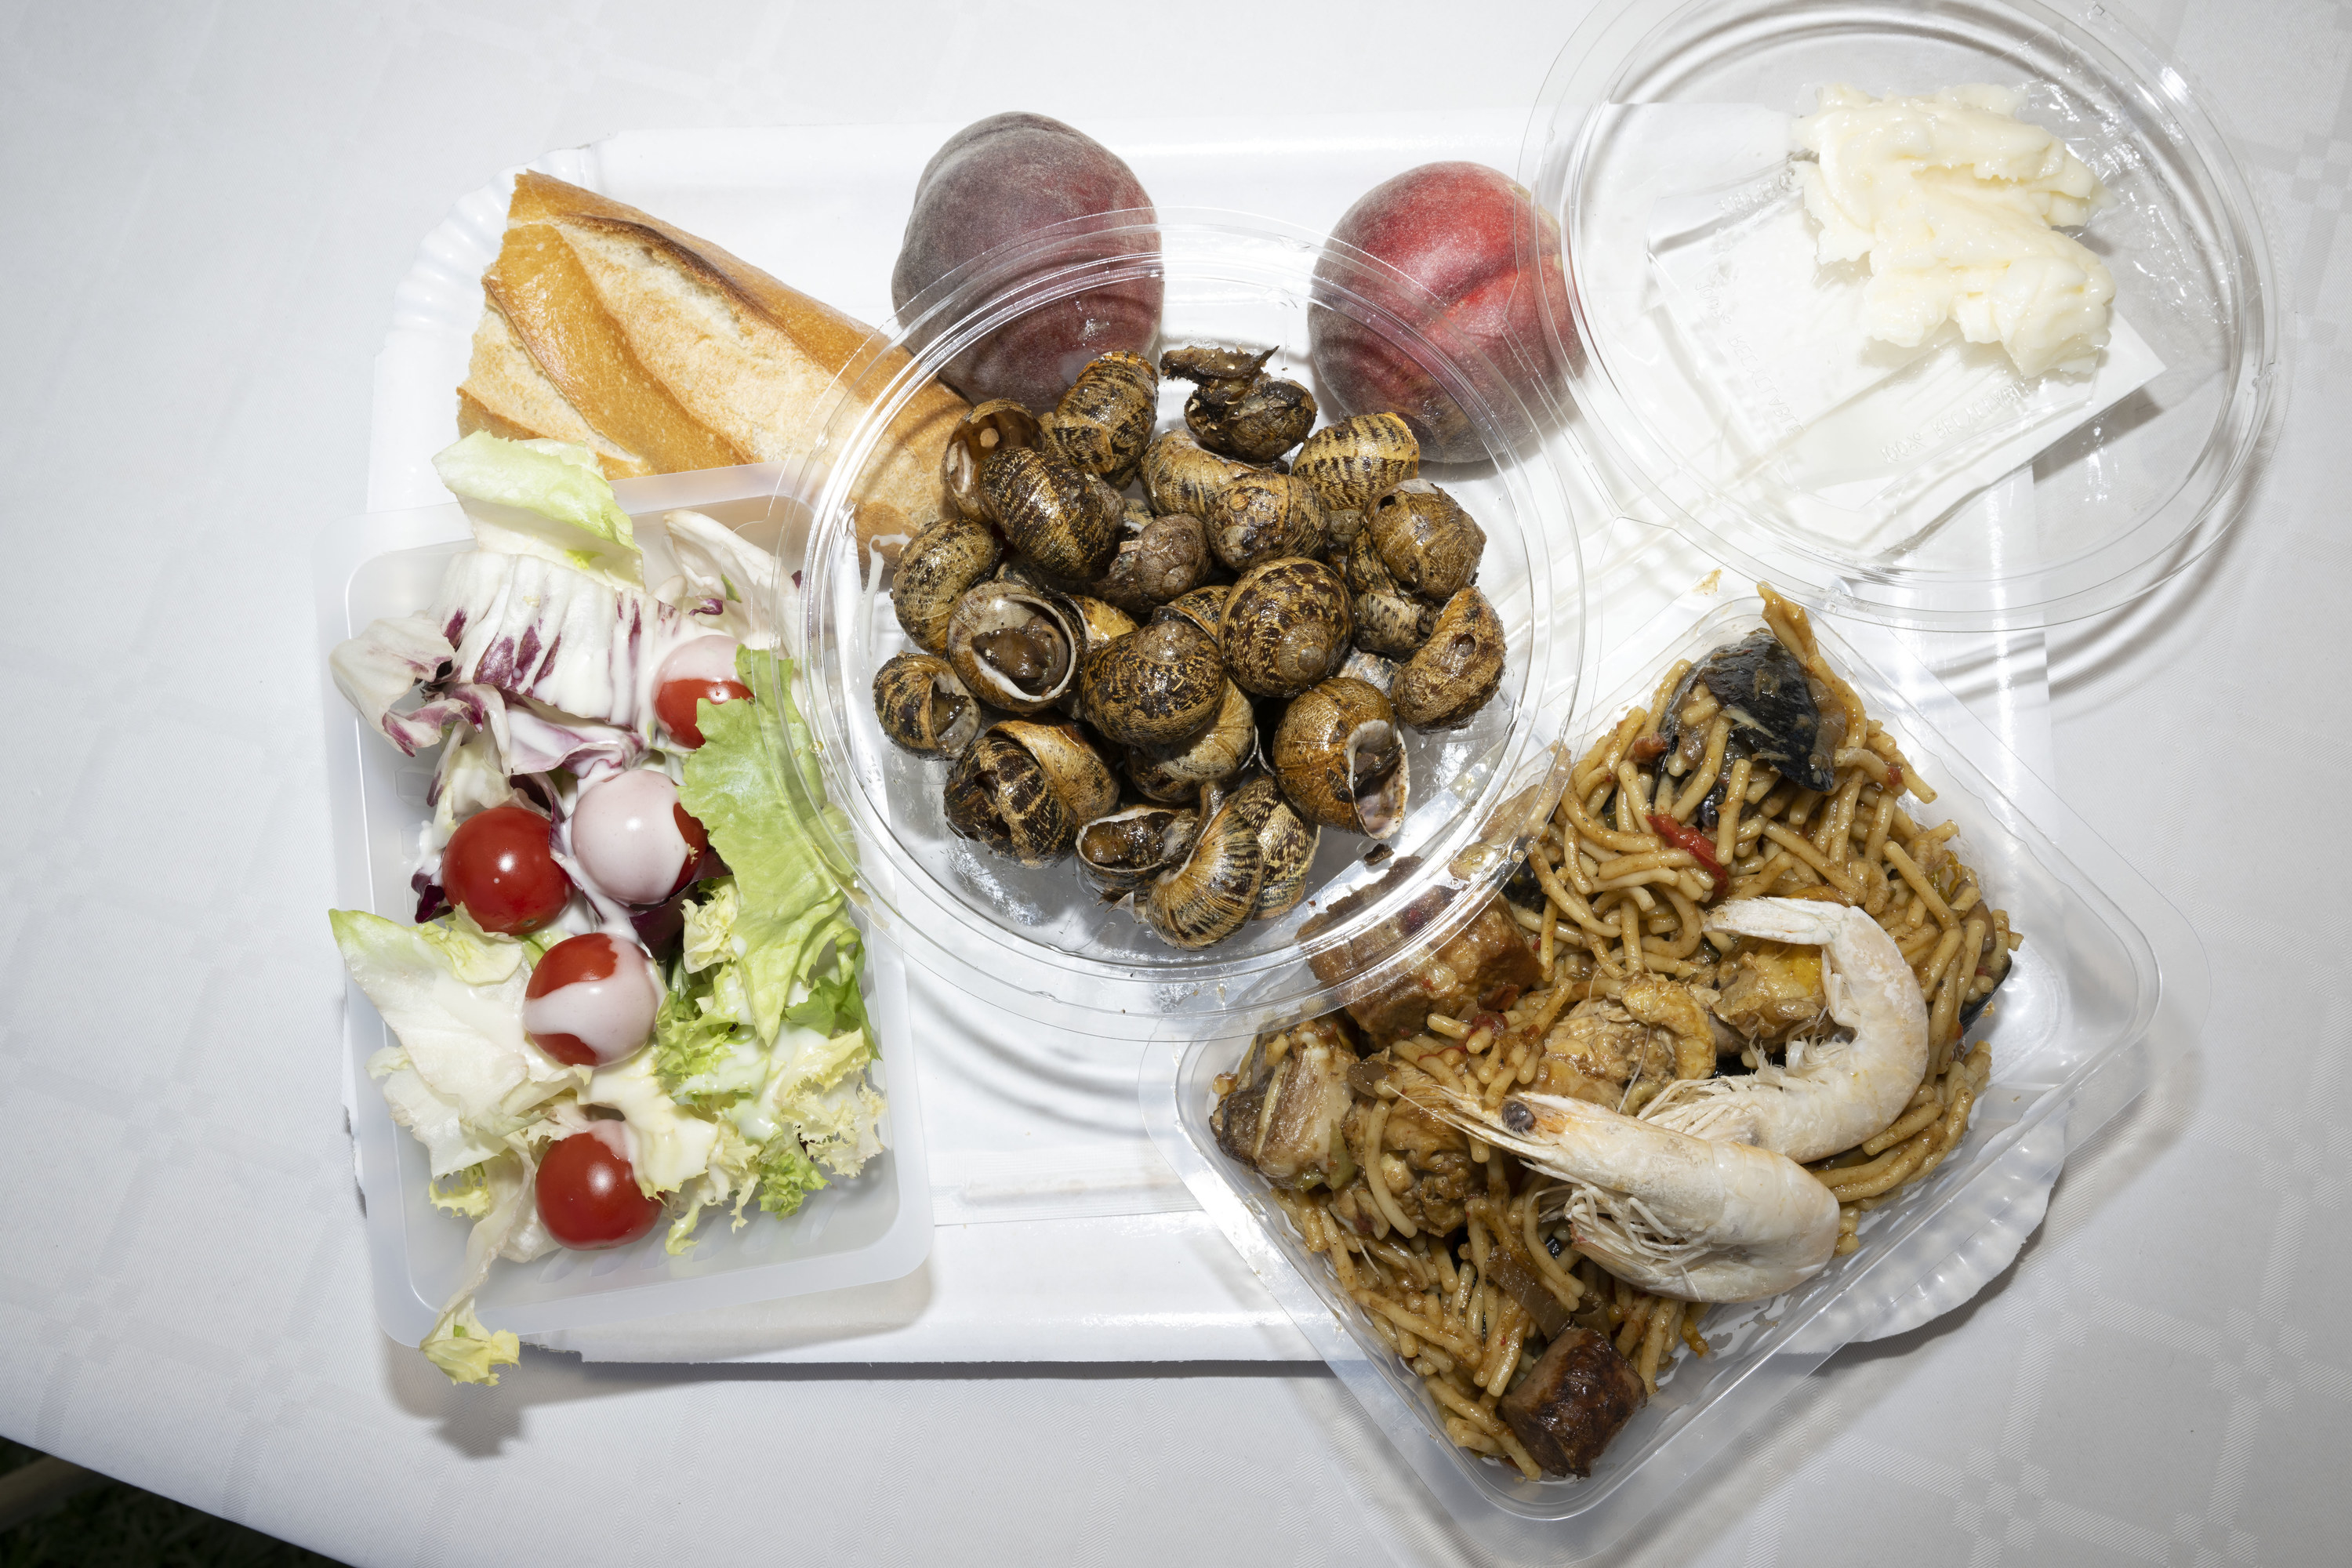 A tray with various plates holding a salad, escargot, paella, peaches, a baguette, and butter